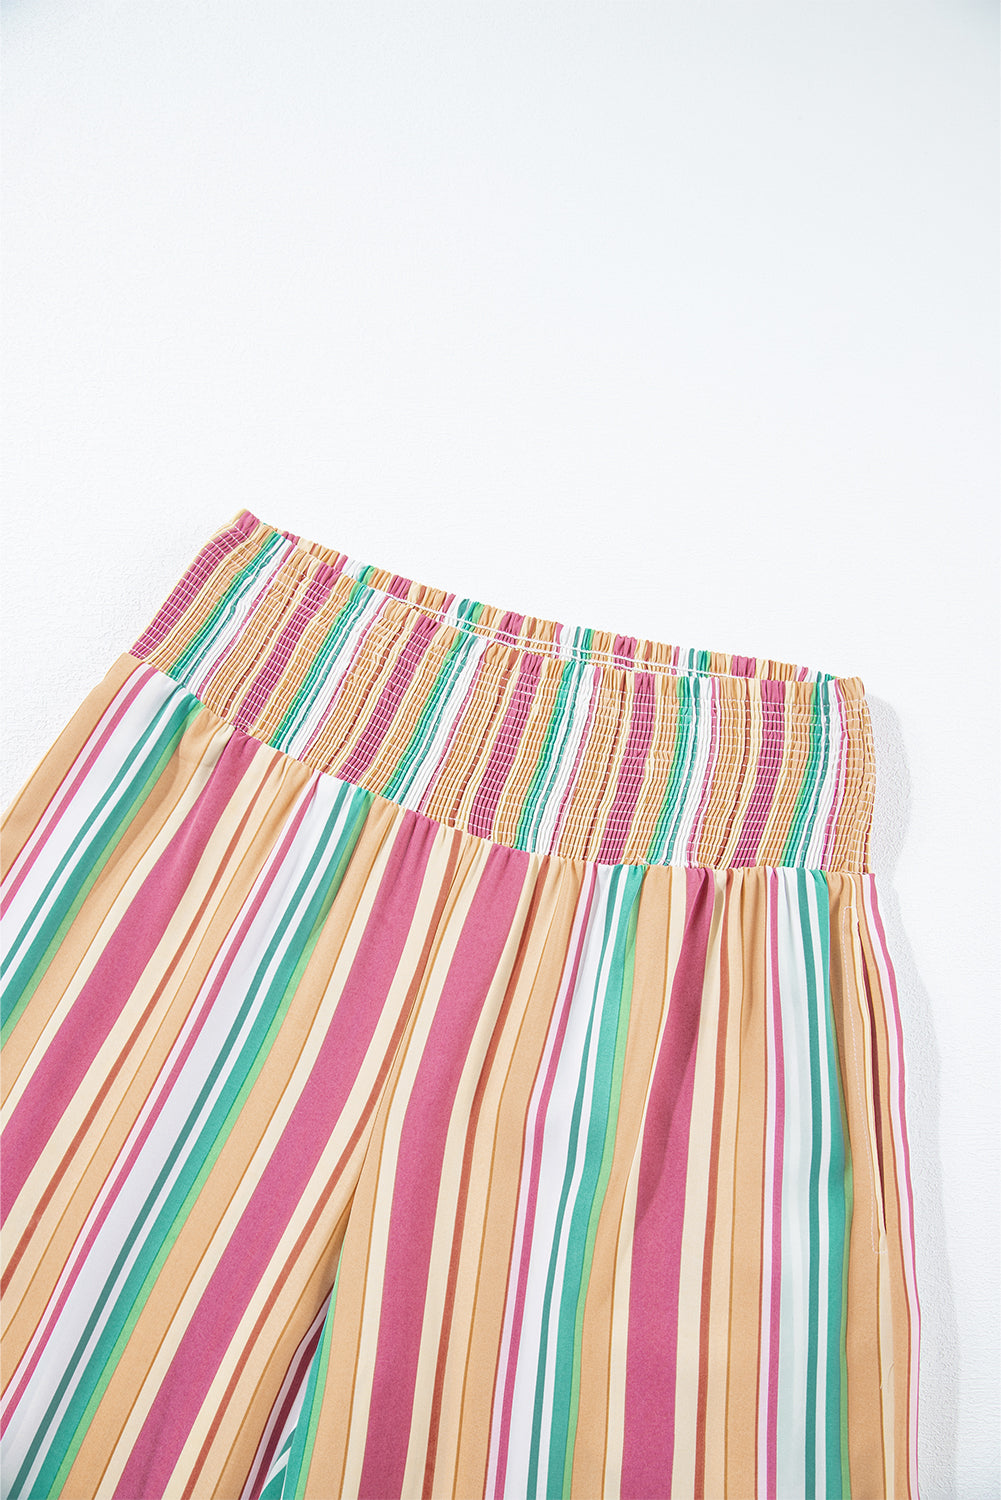 Multicolor Striped High Waist Wide Pants